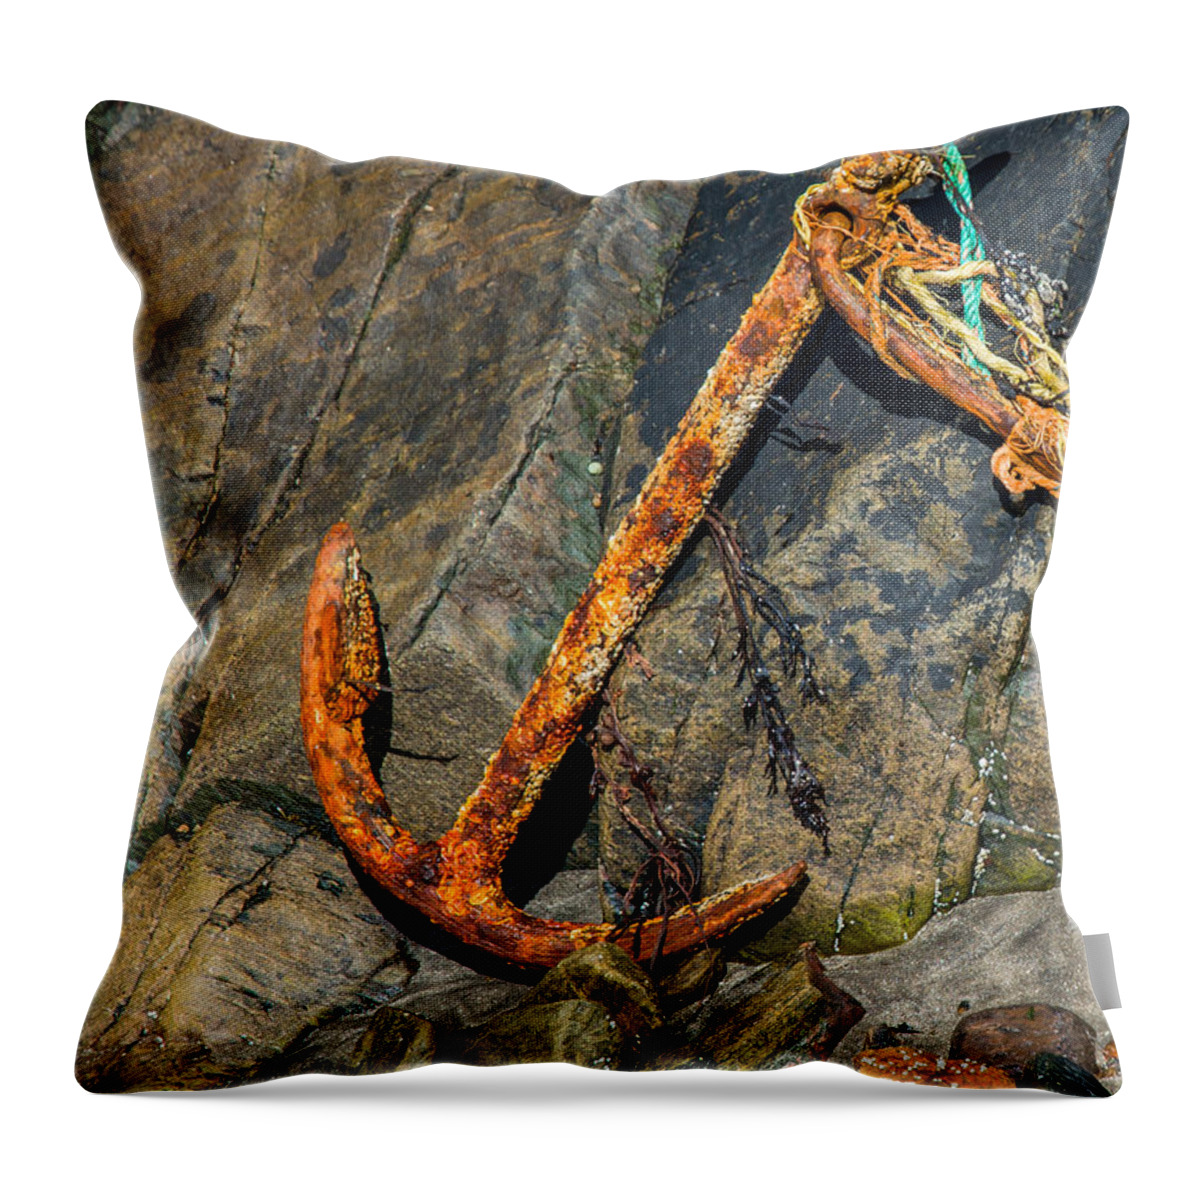 Anchor Throw Pillow featuring the photograph Rusty Anchor by Andreas Berthold